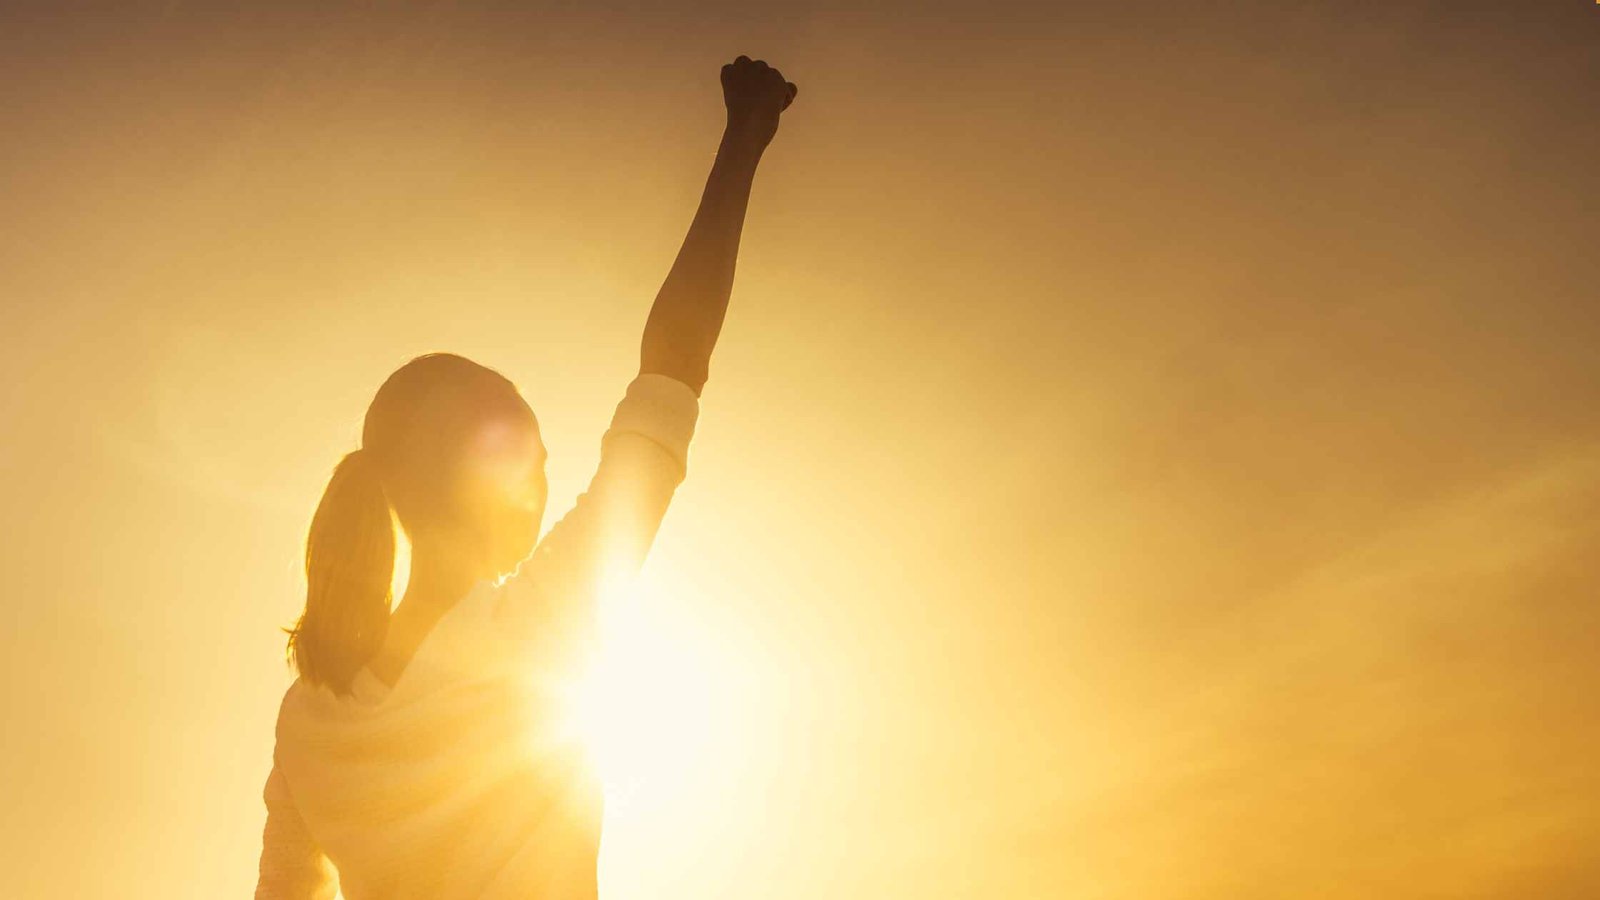 A silhouette of a woman with long hair stood in front of the sun rising with one arm up above her head in triumph